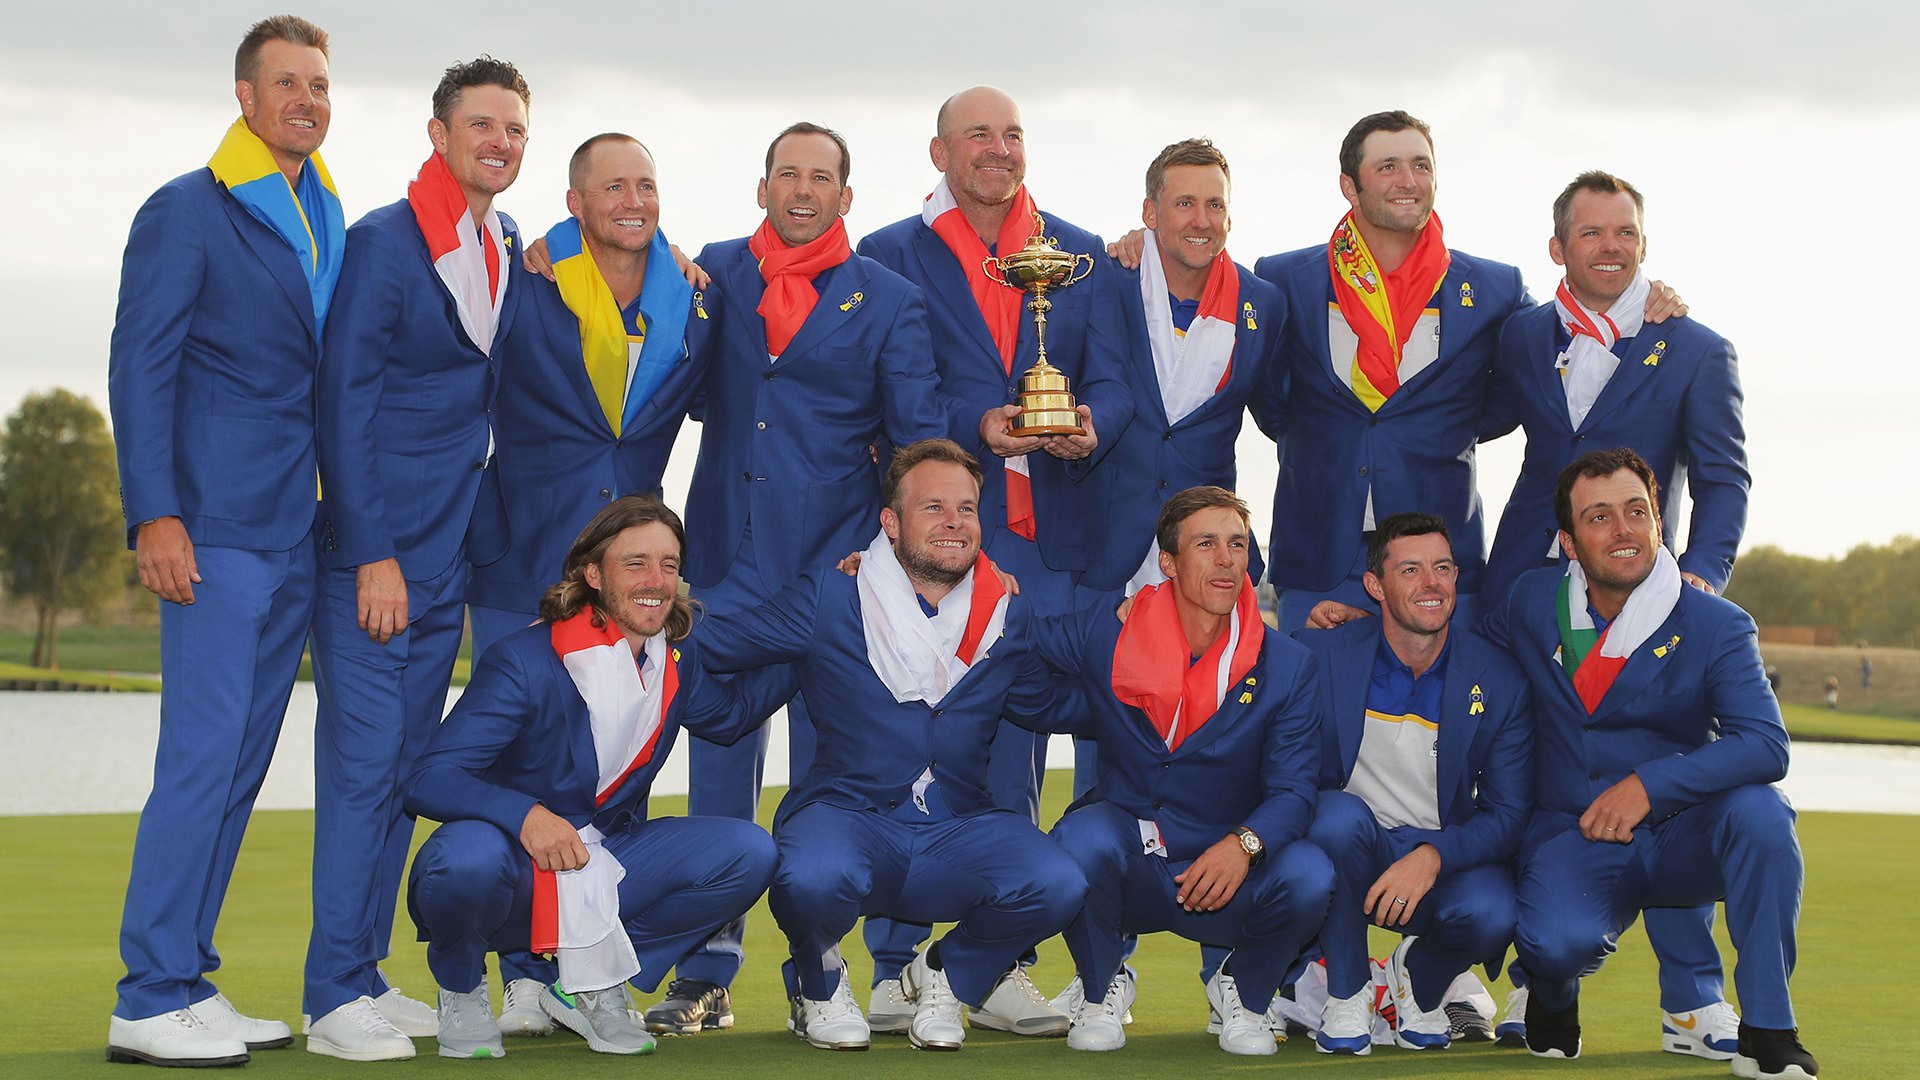 Ryder Cup Team Europe WITB